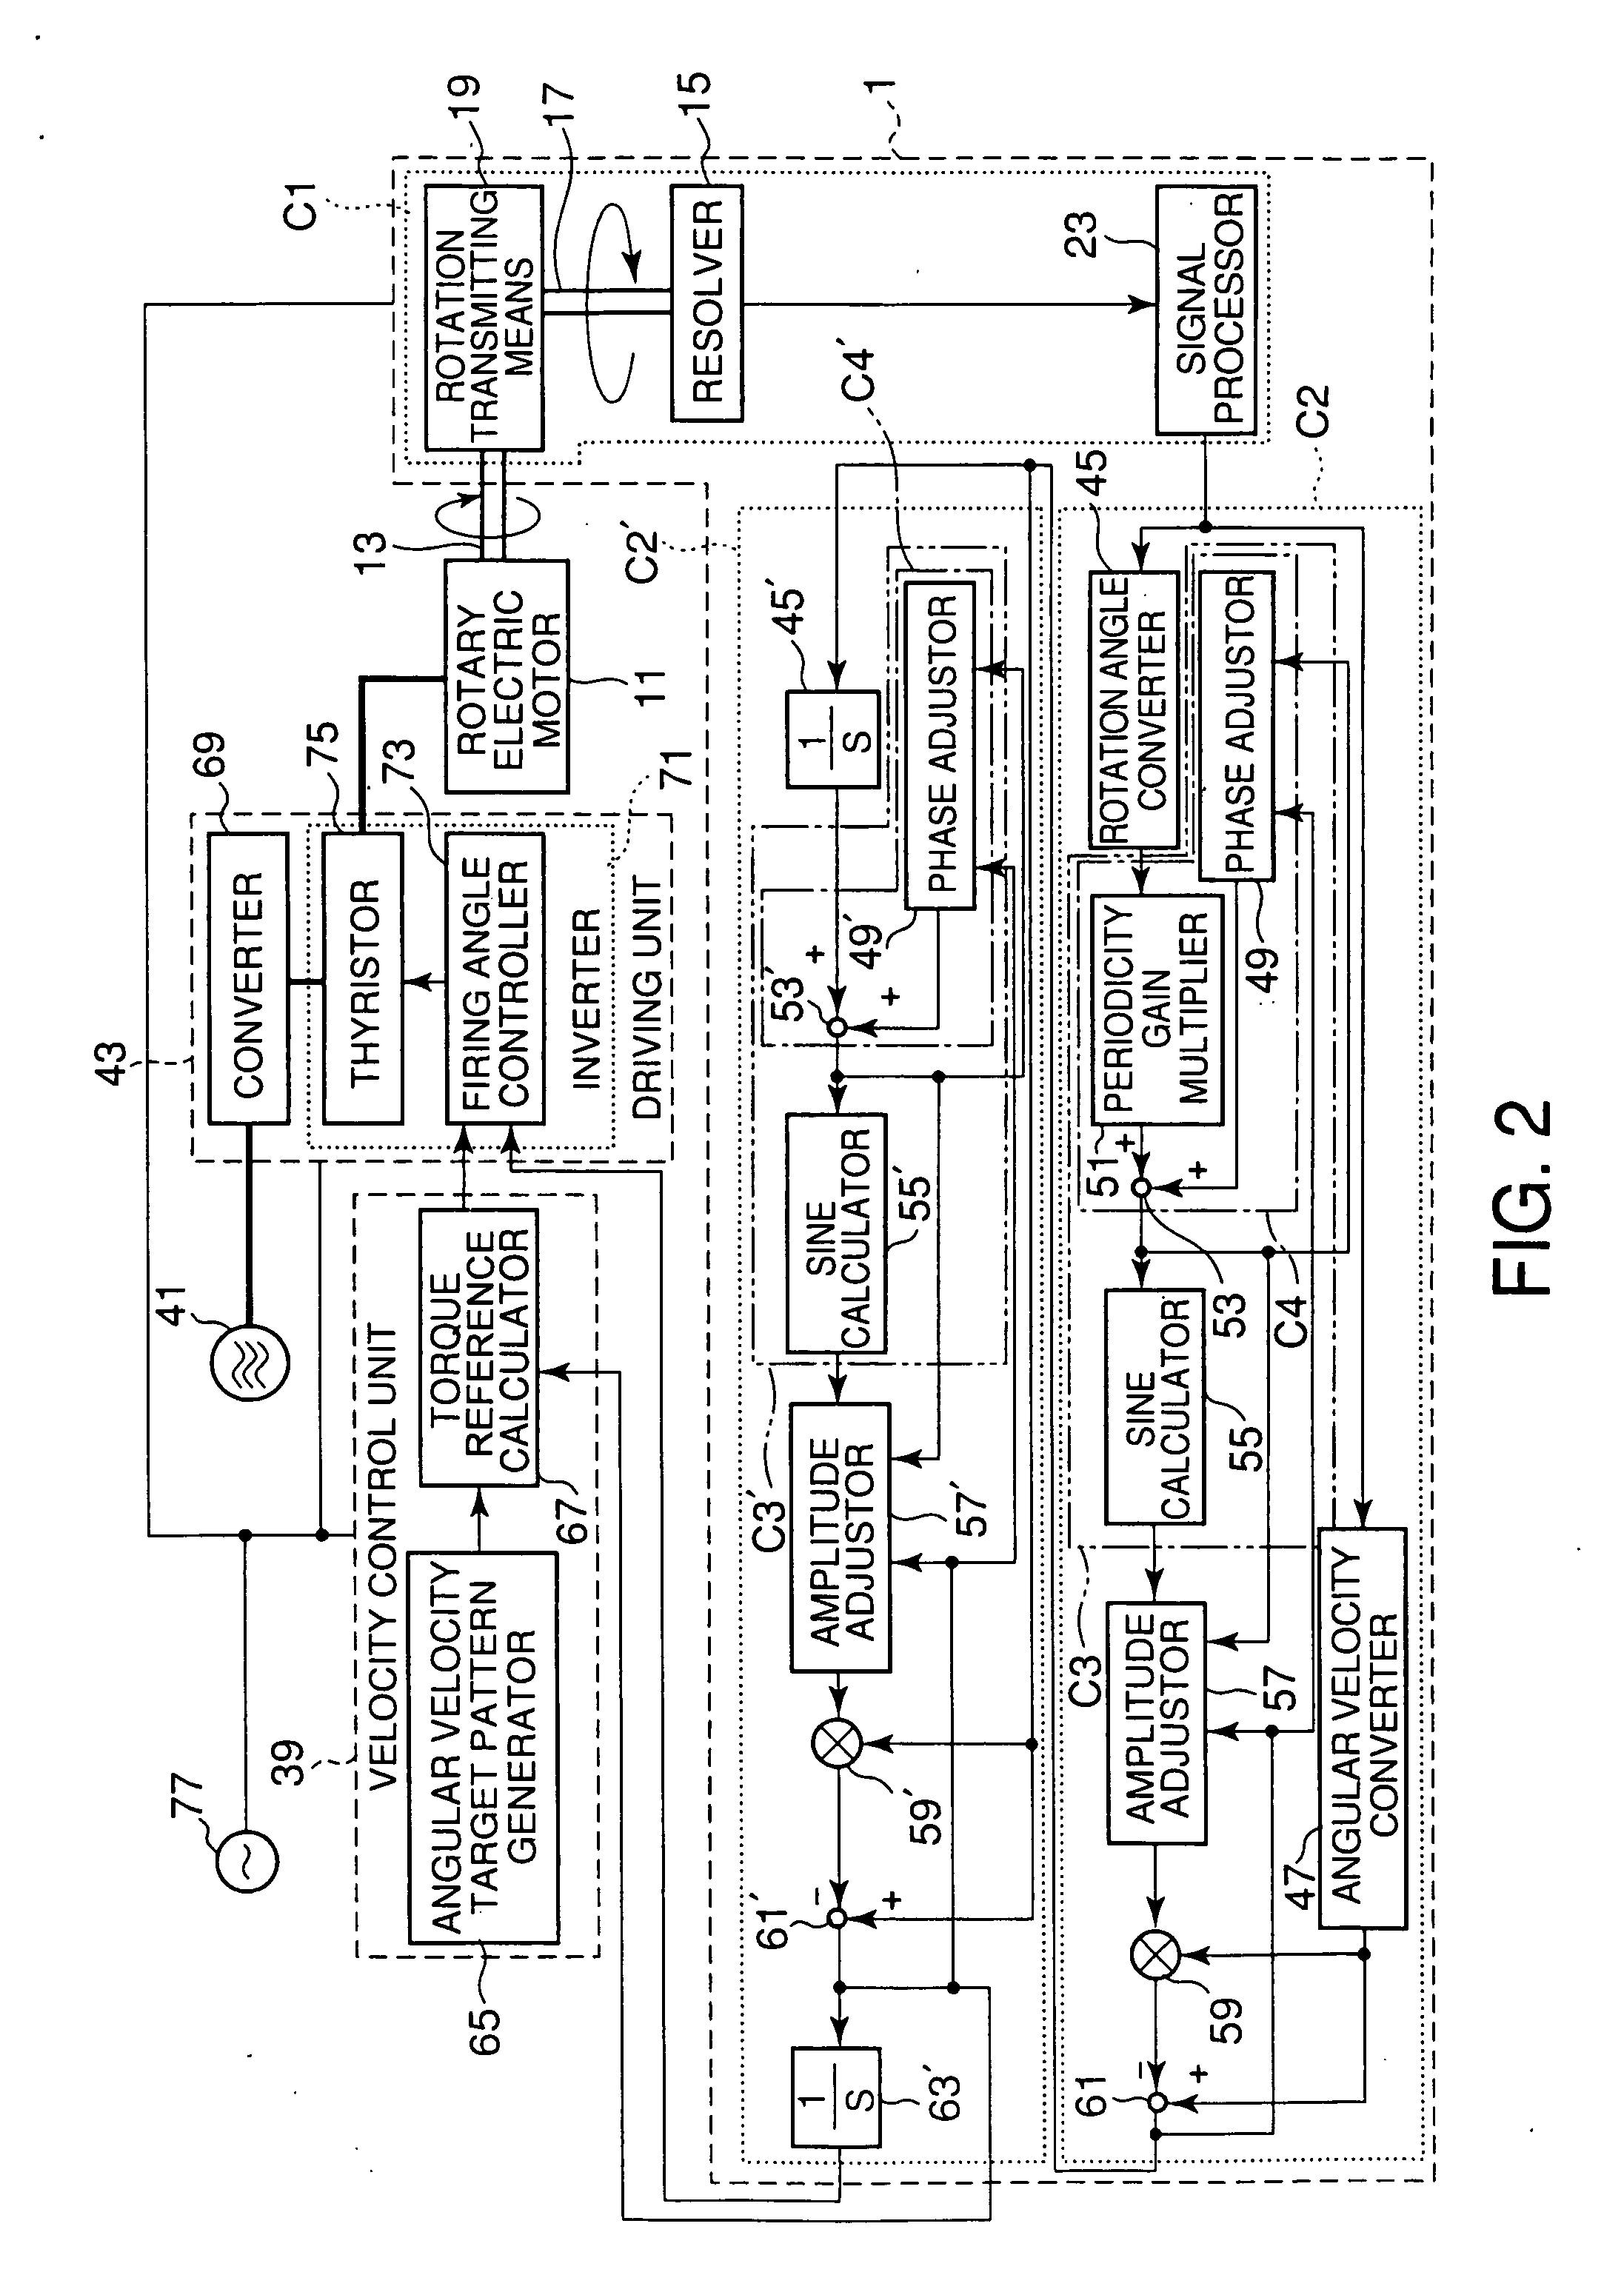 Rotation detection device